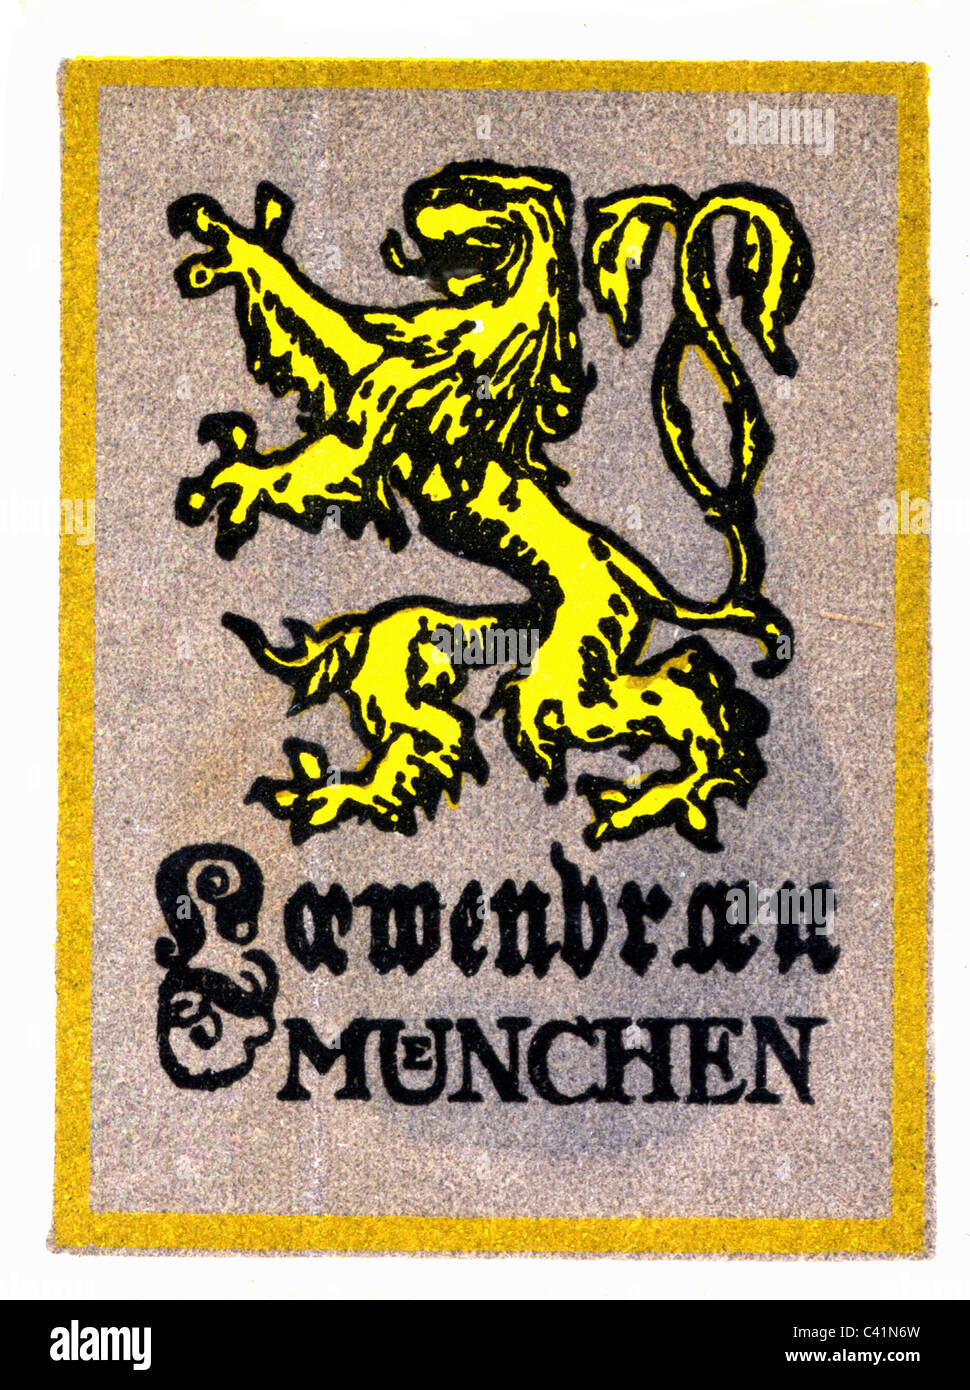 advertising, beer, Lowenbrau, poster stamp, Munich, circa 1900, Additional-Rights-Clearences-Not Available Stock Photo